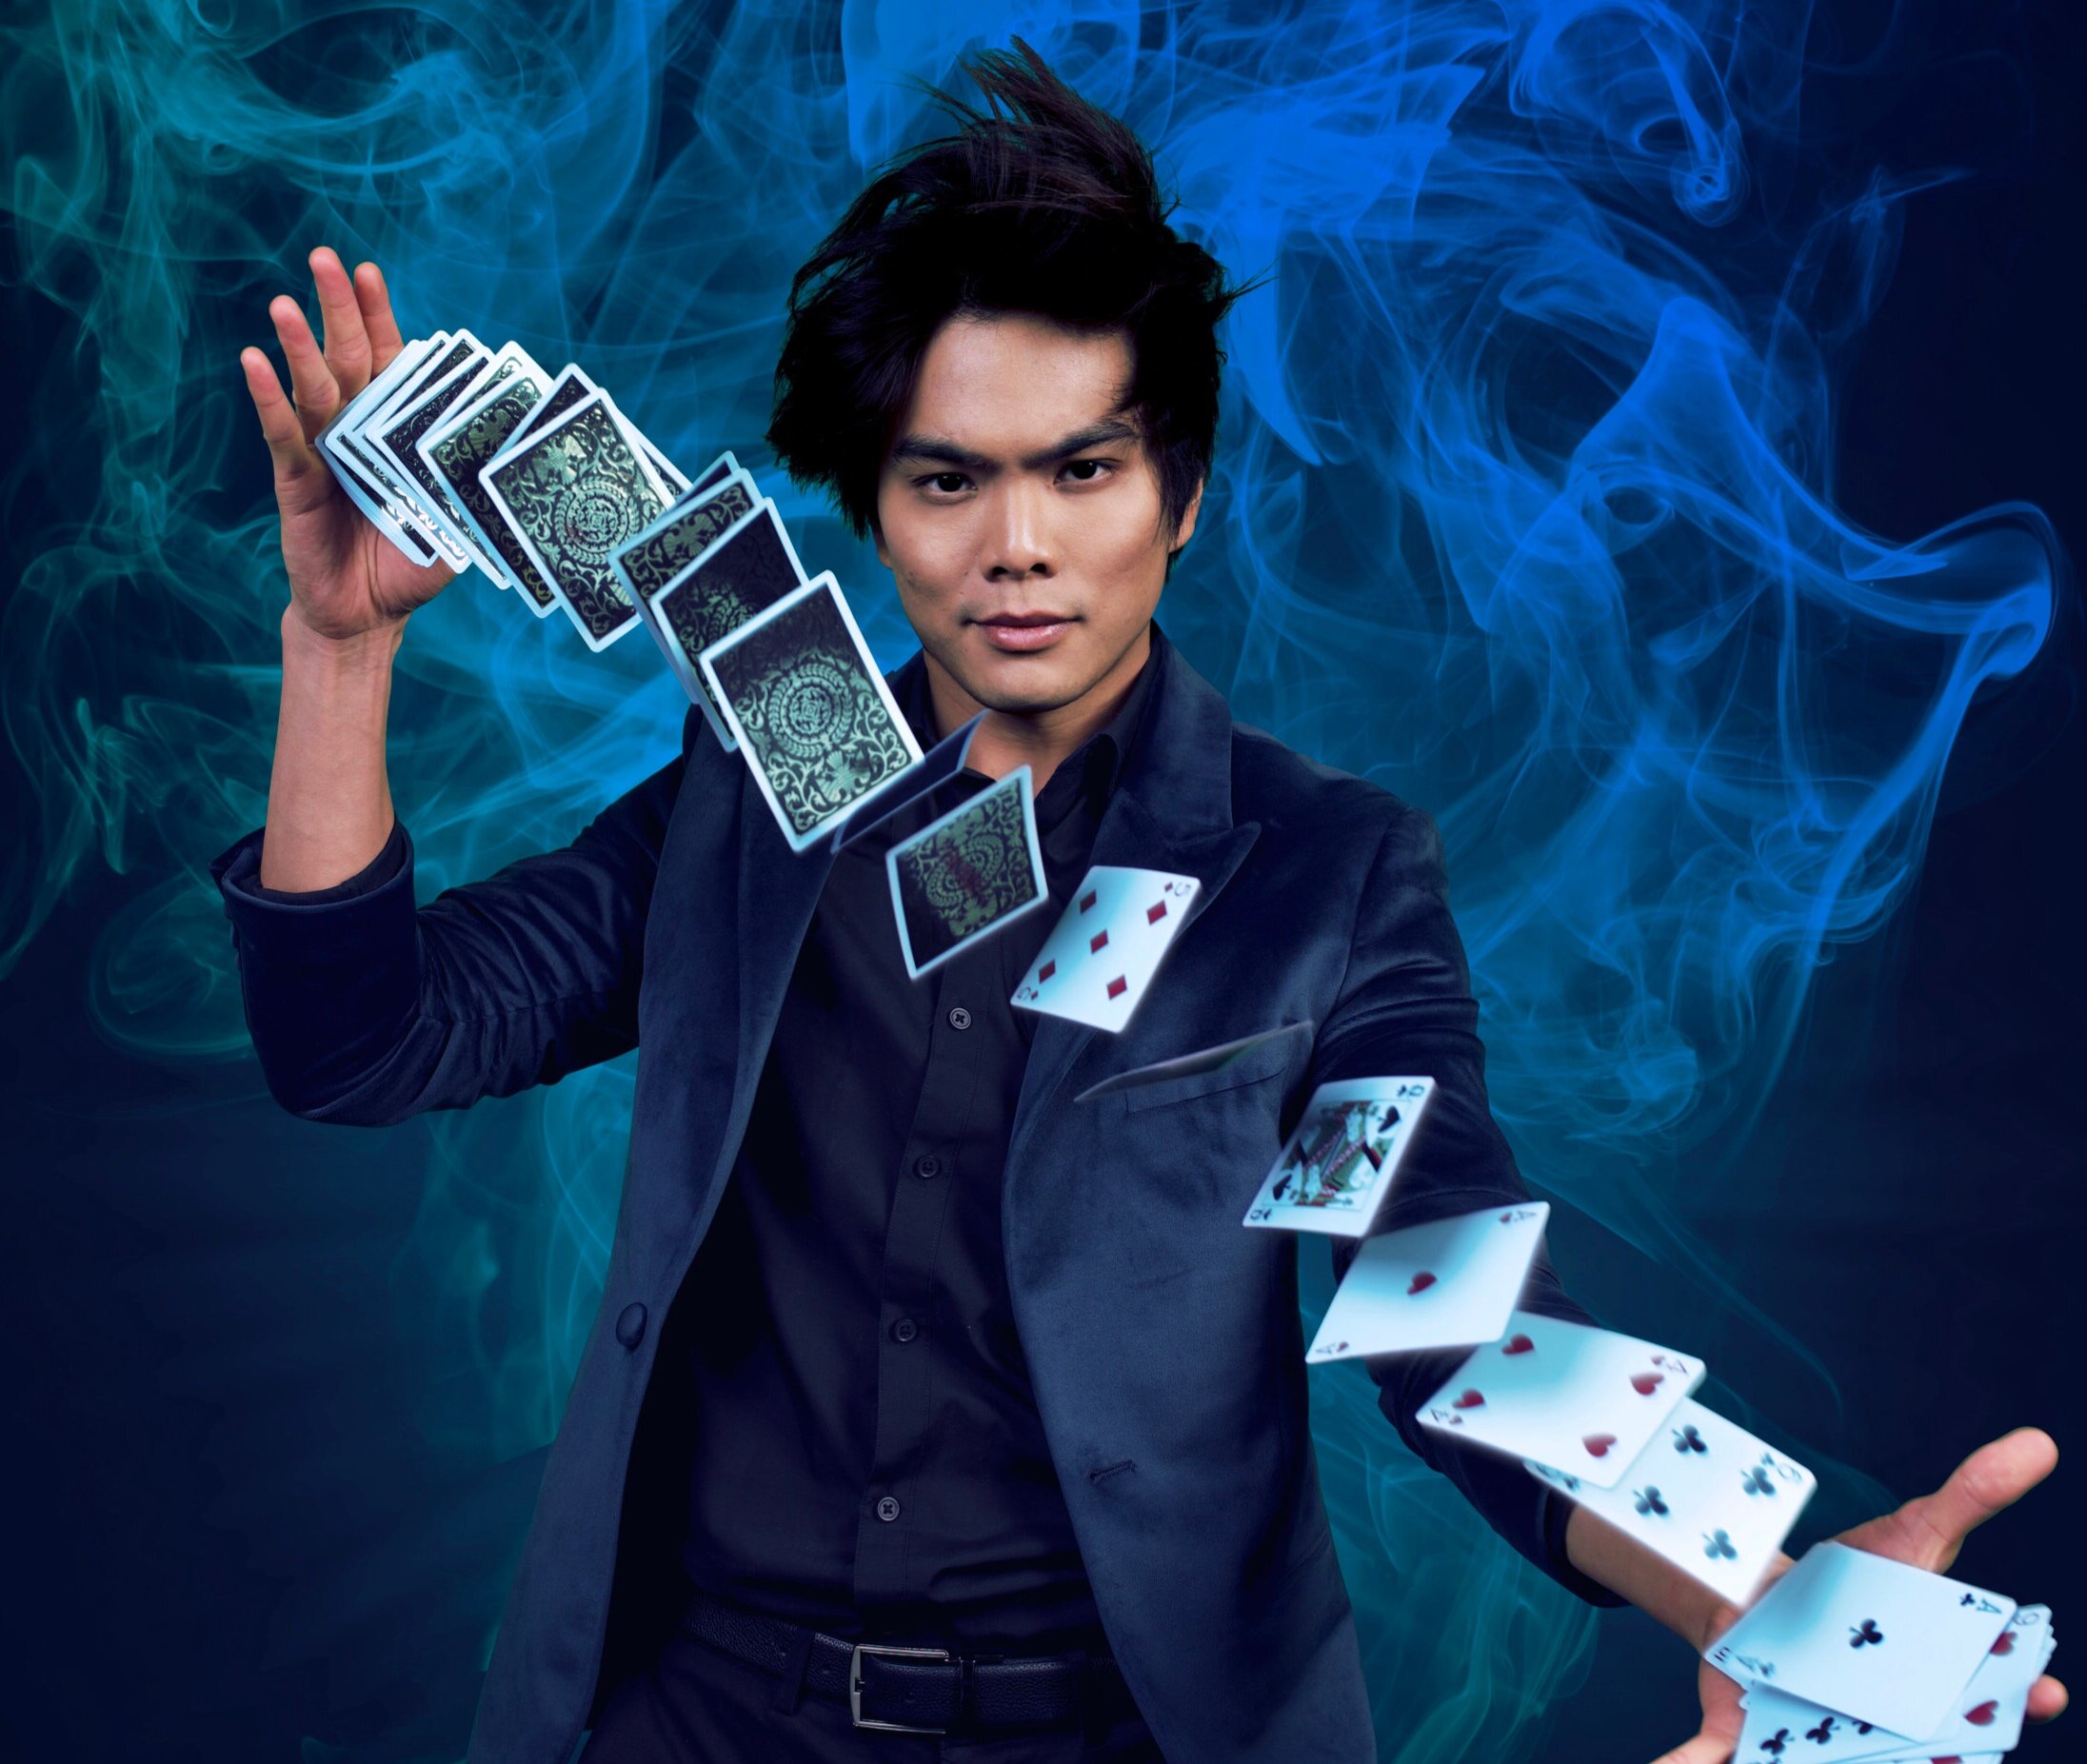 Shin Lim - Most Popular Magicians in the World